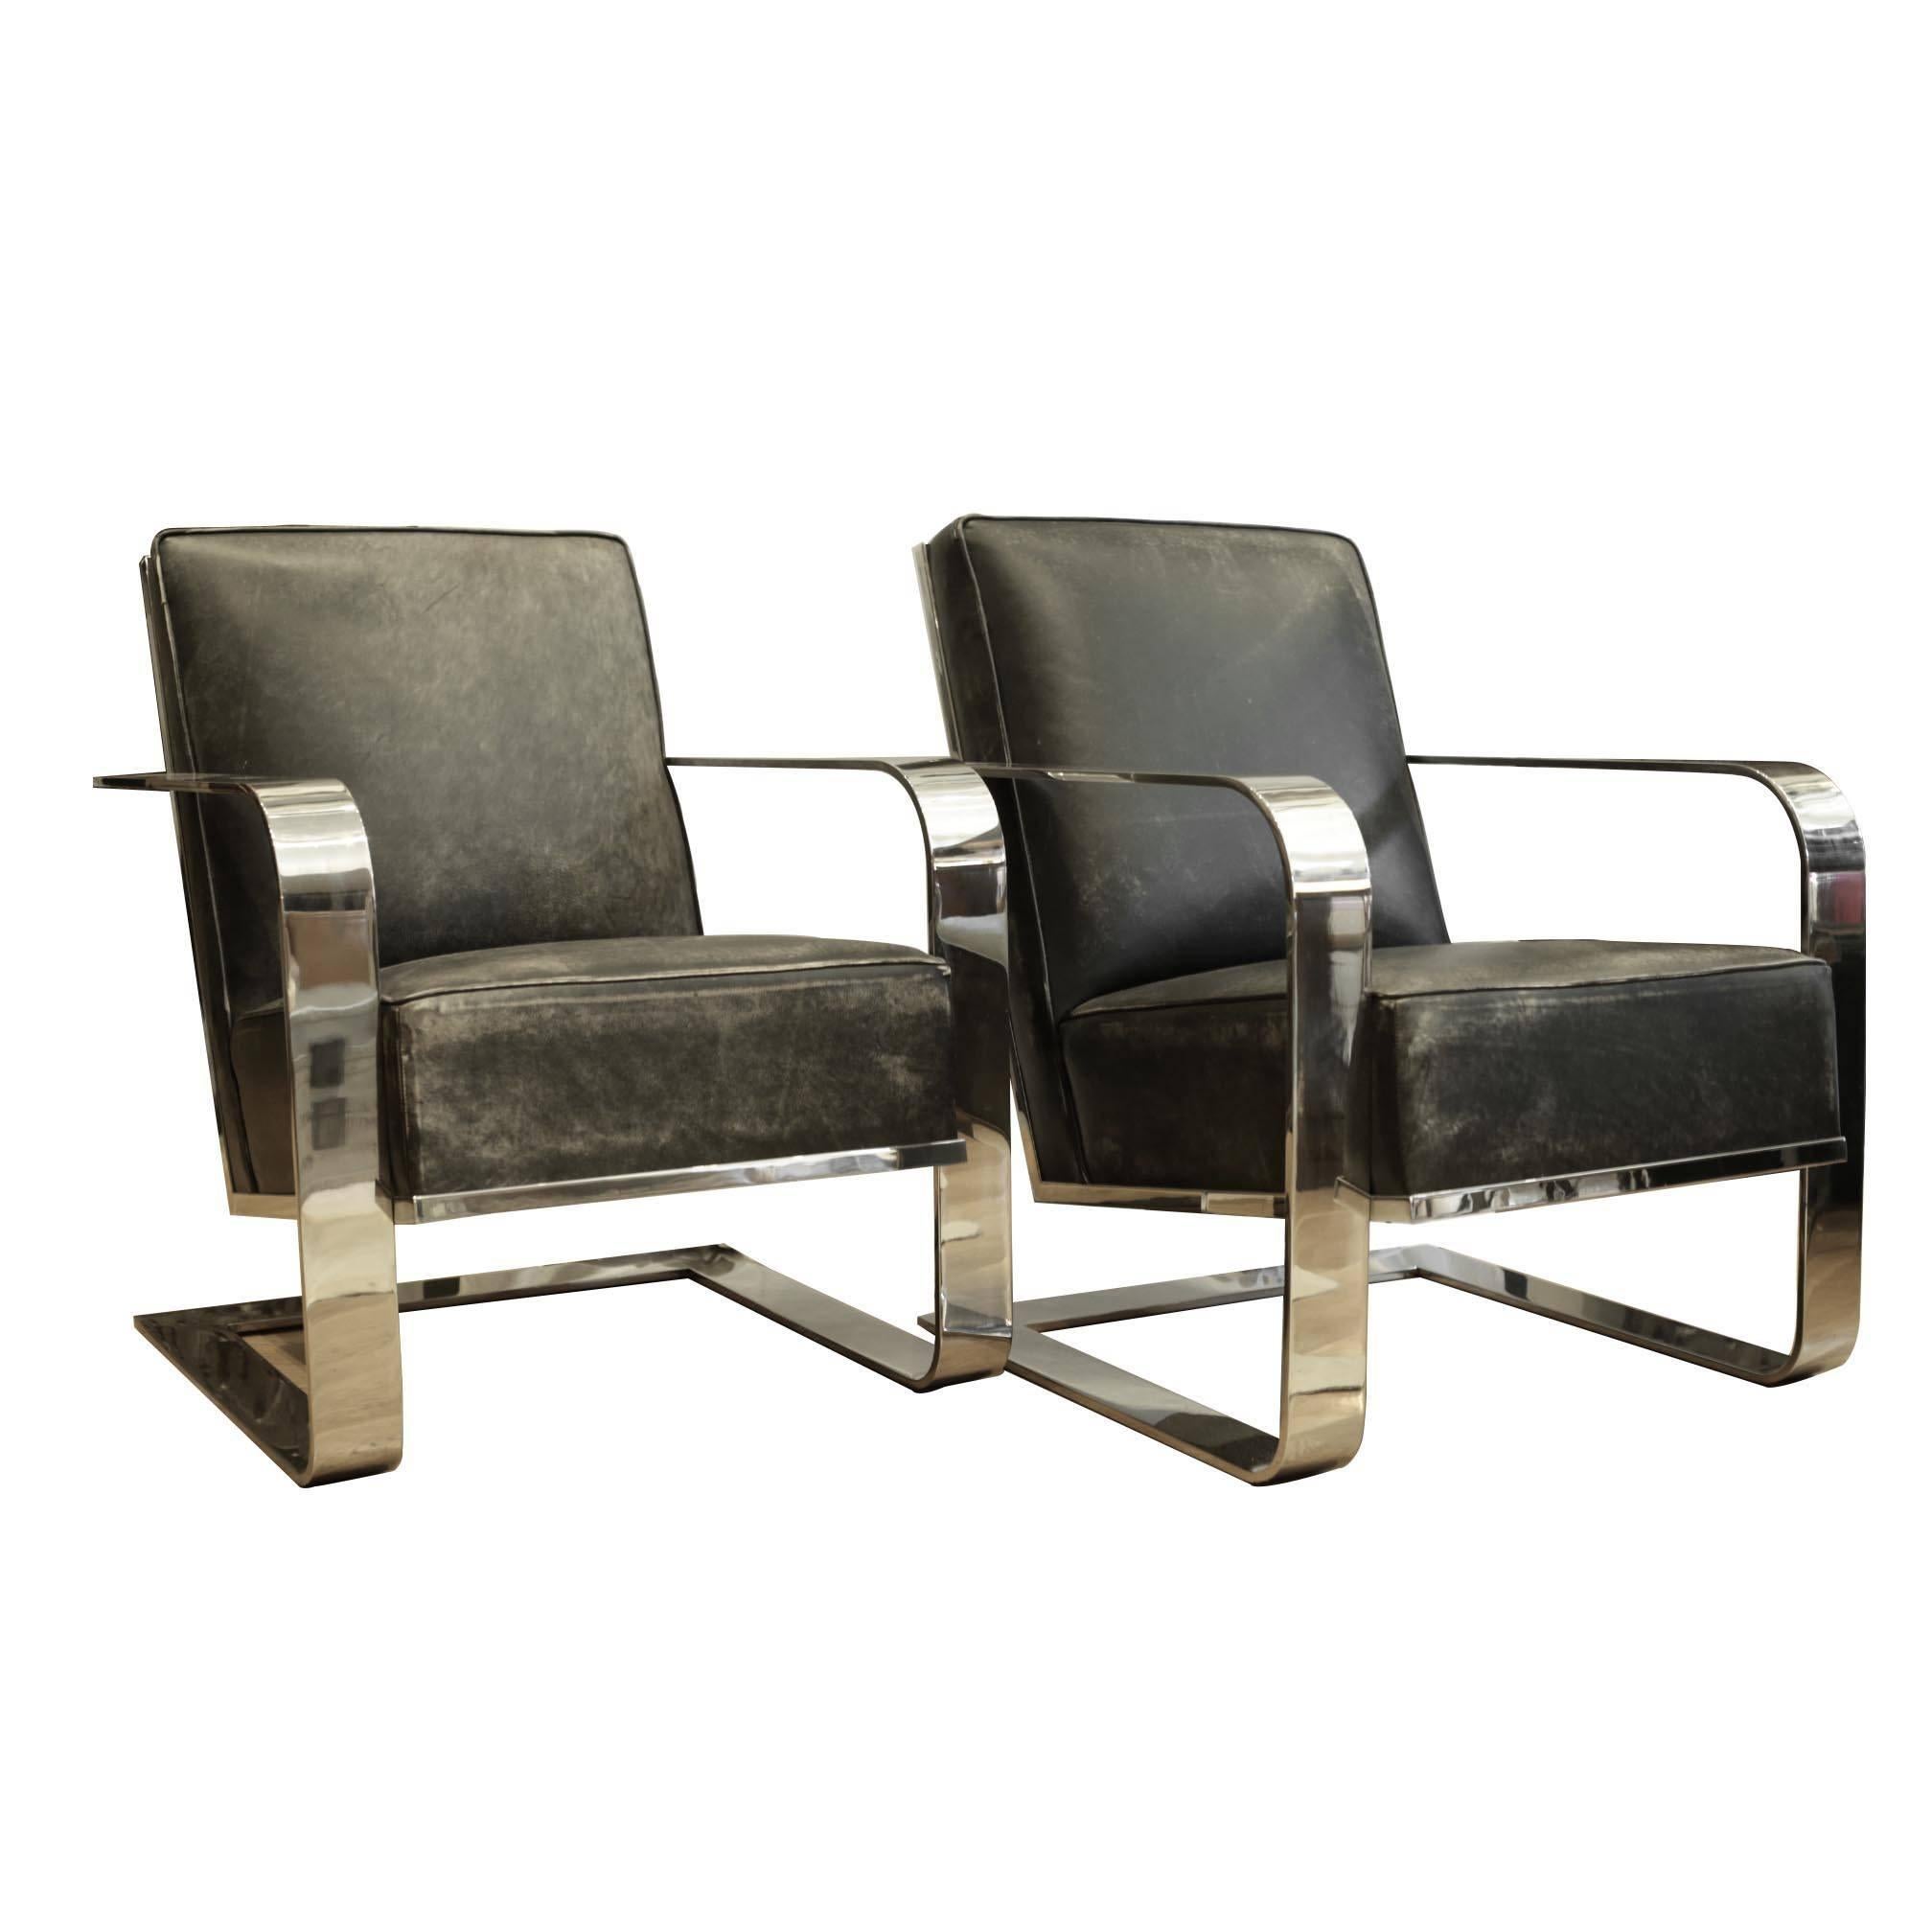 Pair of New Distressed Leather and Chrome Ralph Lauren Home Lounge Chairs  at 1stDibs